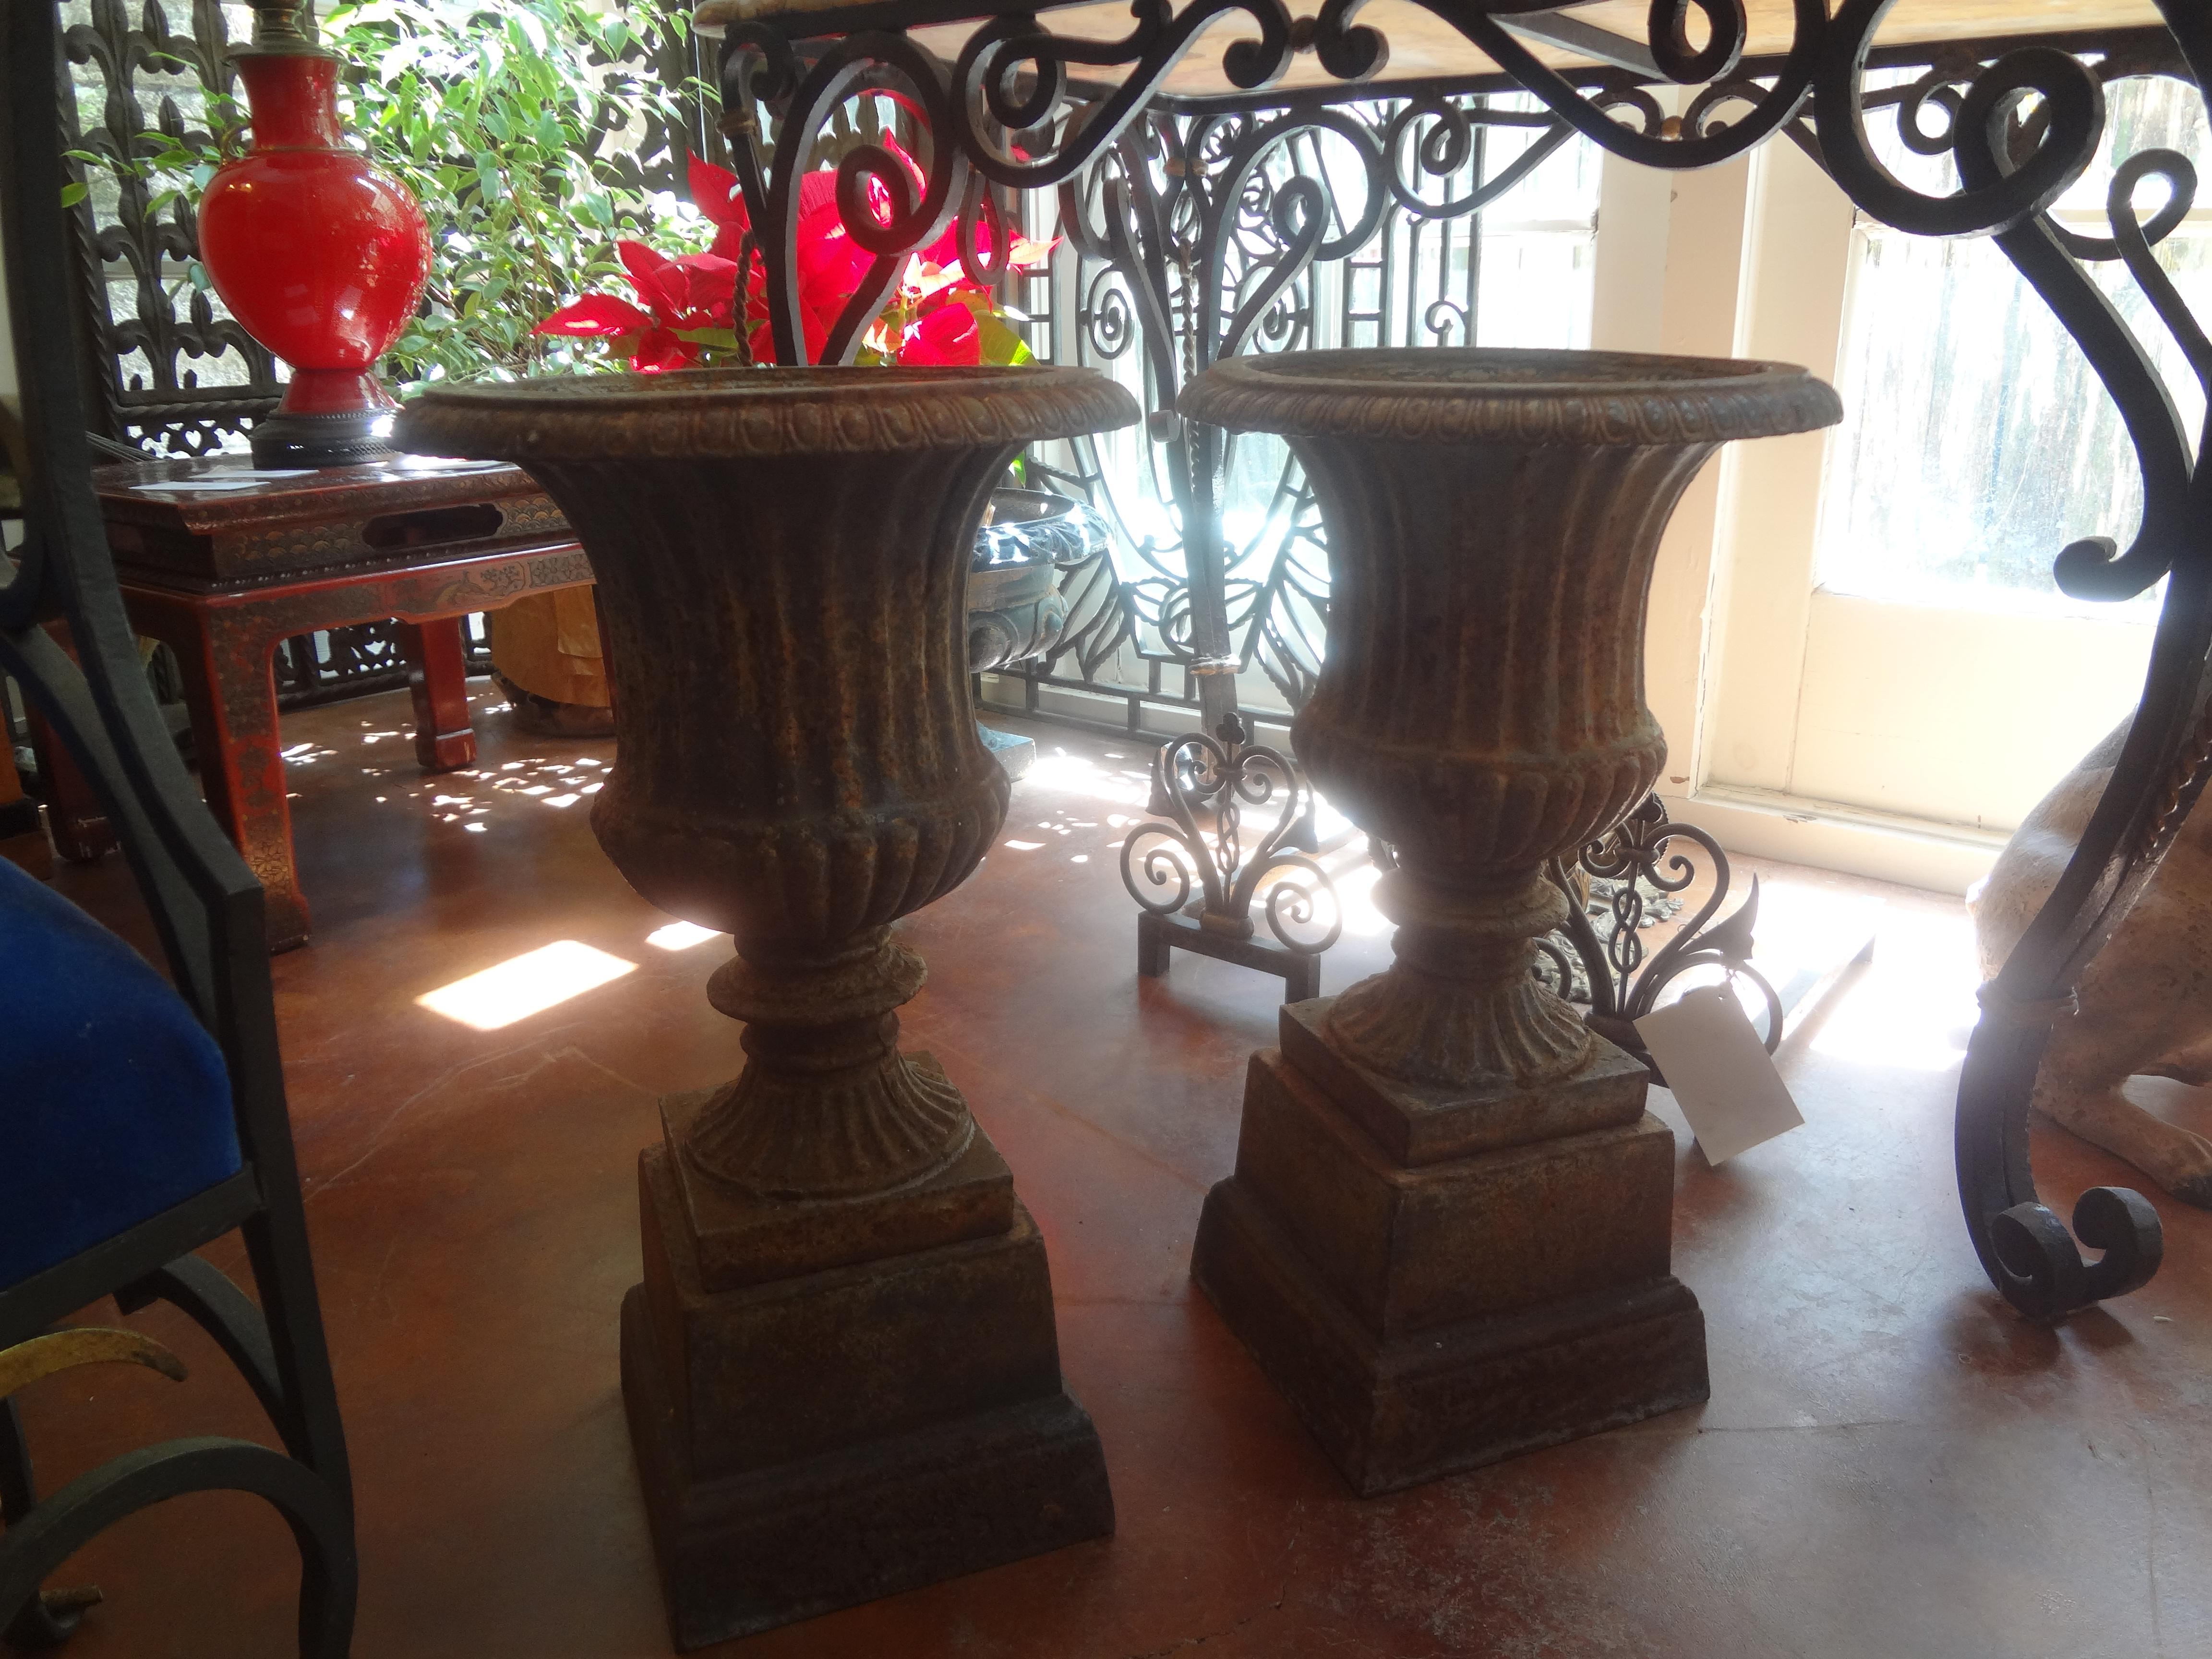 Late 19th Century Pair of 19th Century French Neoclassical Style Iron Urns on Plinths For Sale